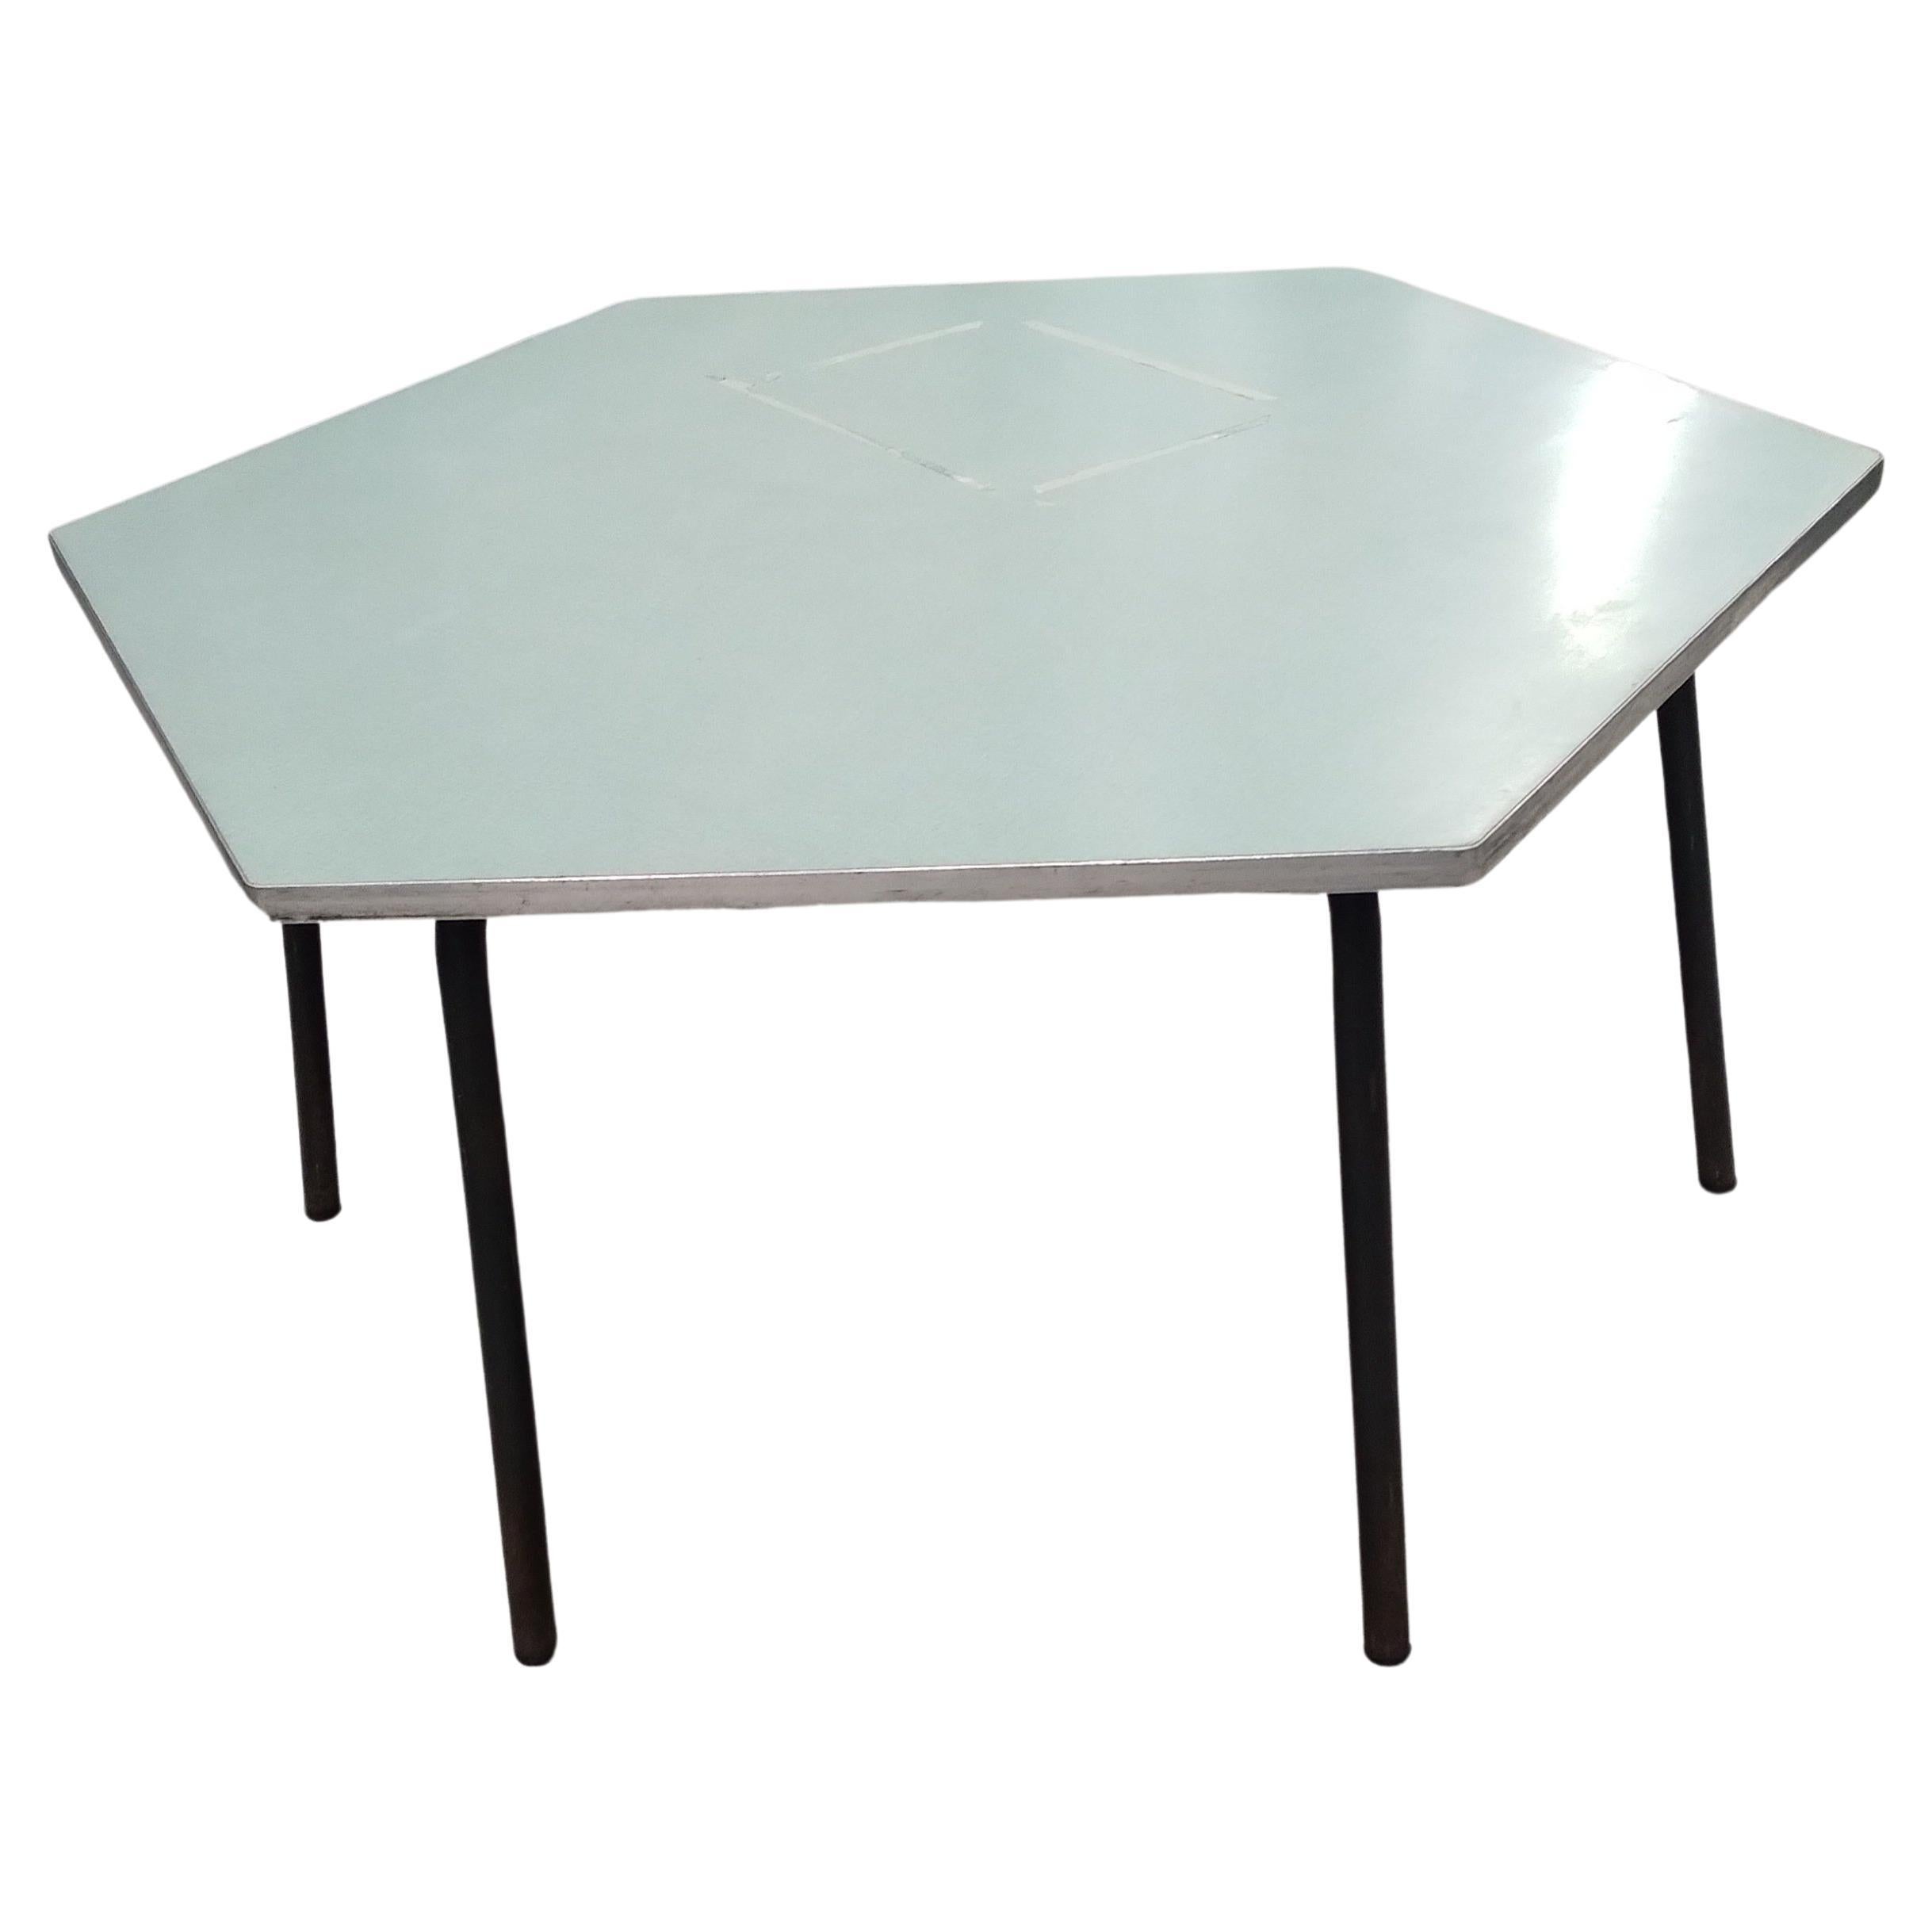 3 Low Hexagonal Tables Italy 1960 For Sale